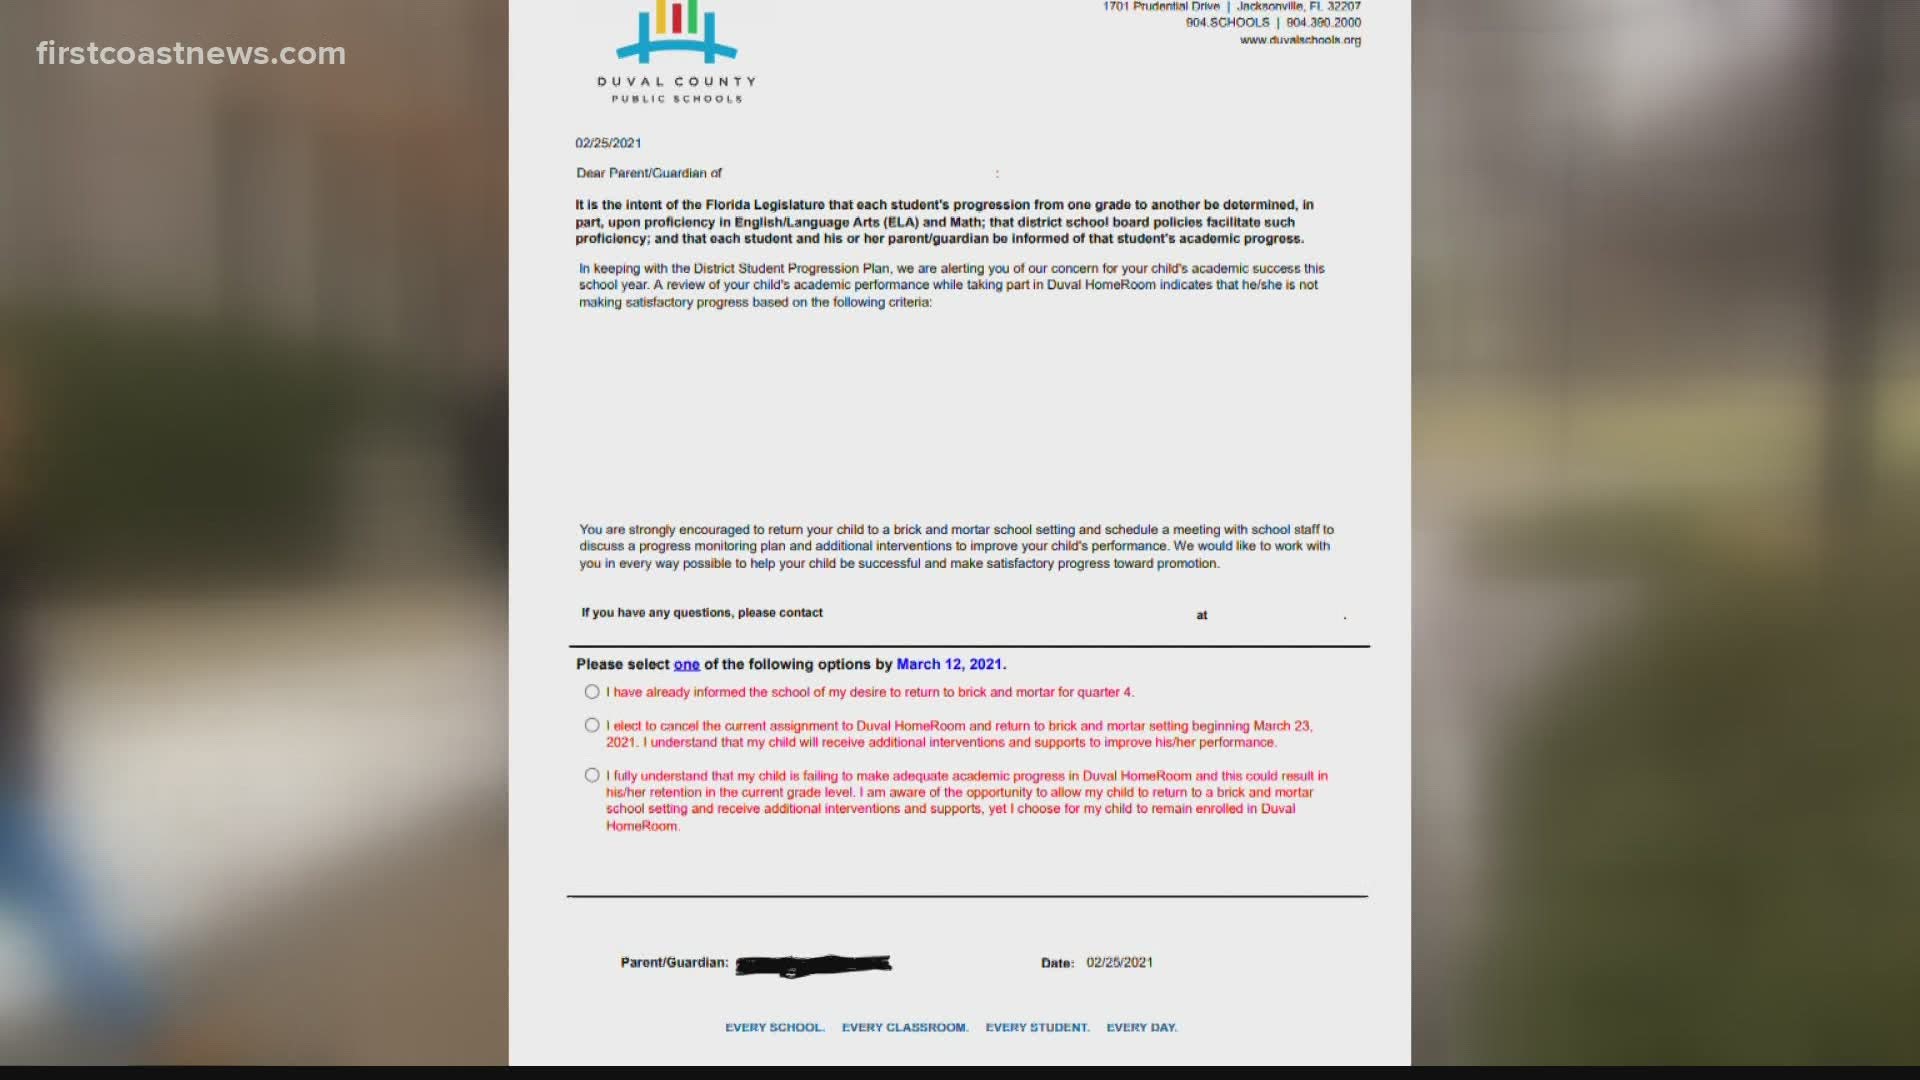 The district sent a letter to 17,000 students encouraging students to come back to school.